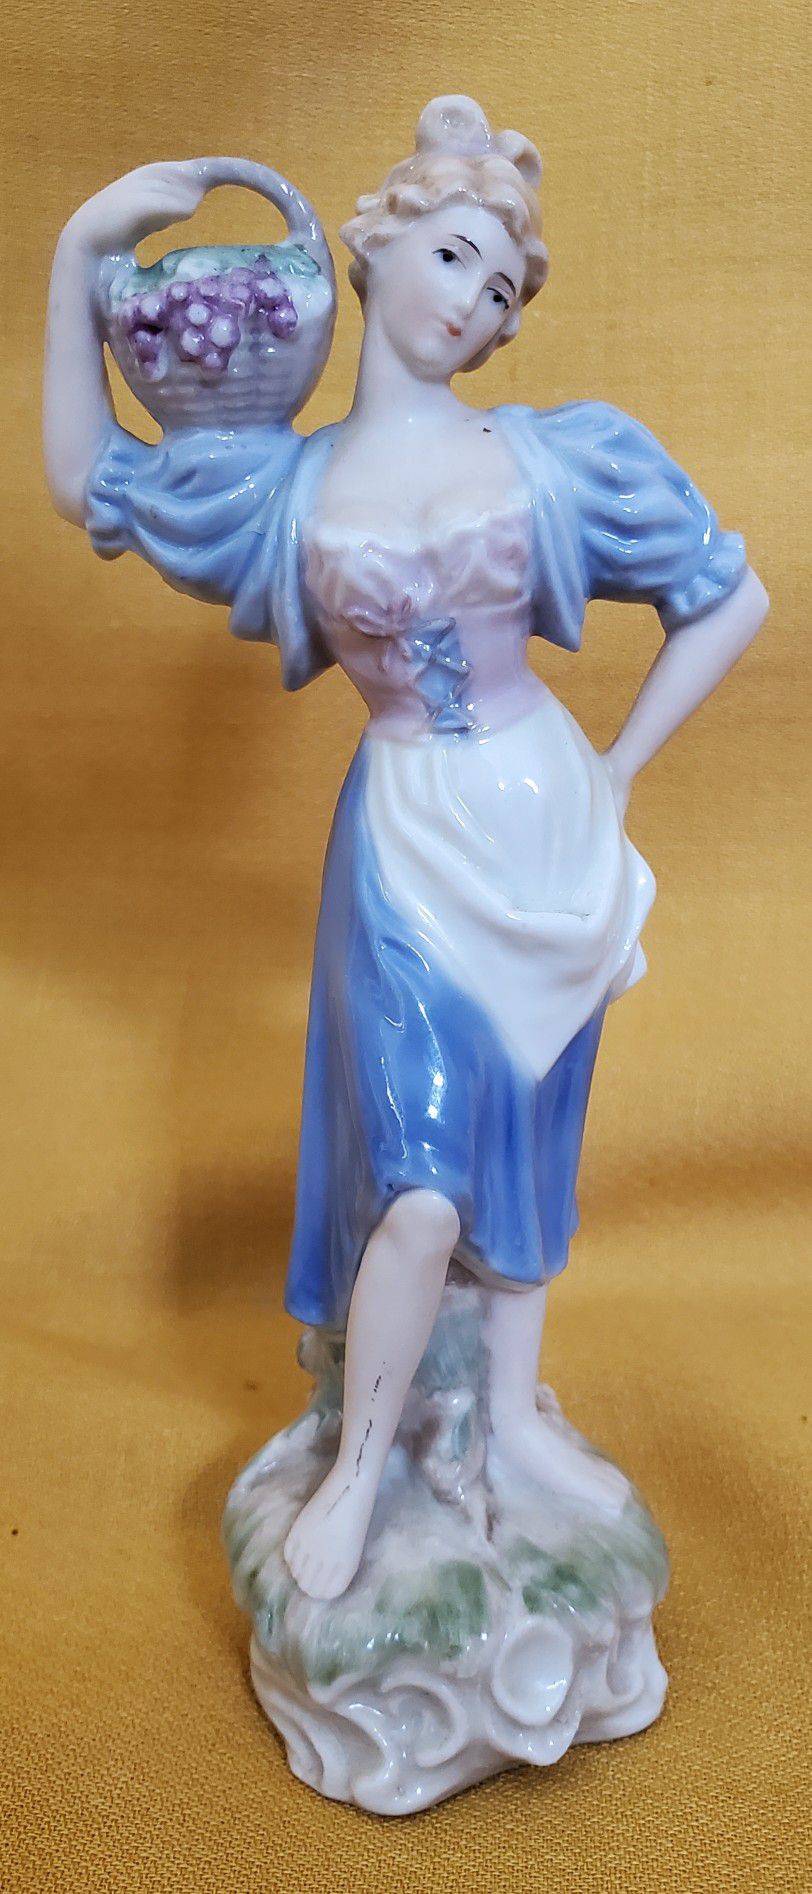 Vintage Lladro Style Figurine; Lady Carrying Flower Pot 7" tall - REDUCED 